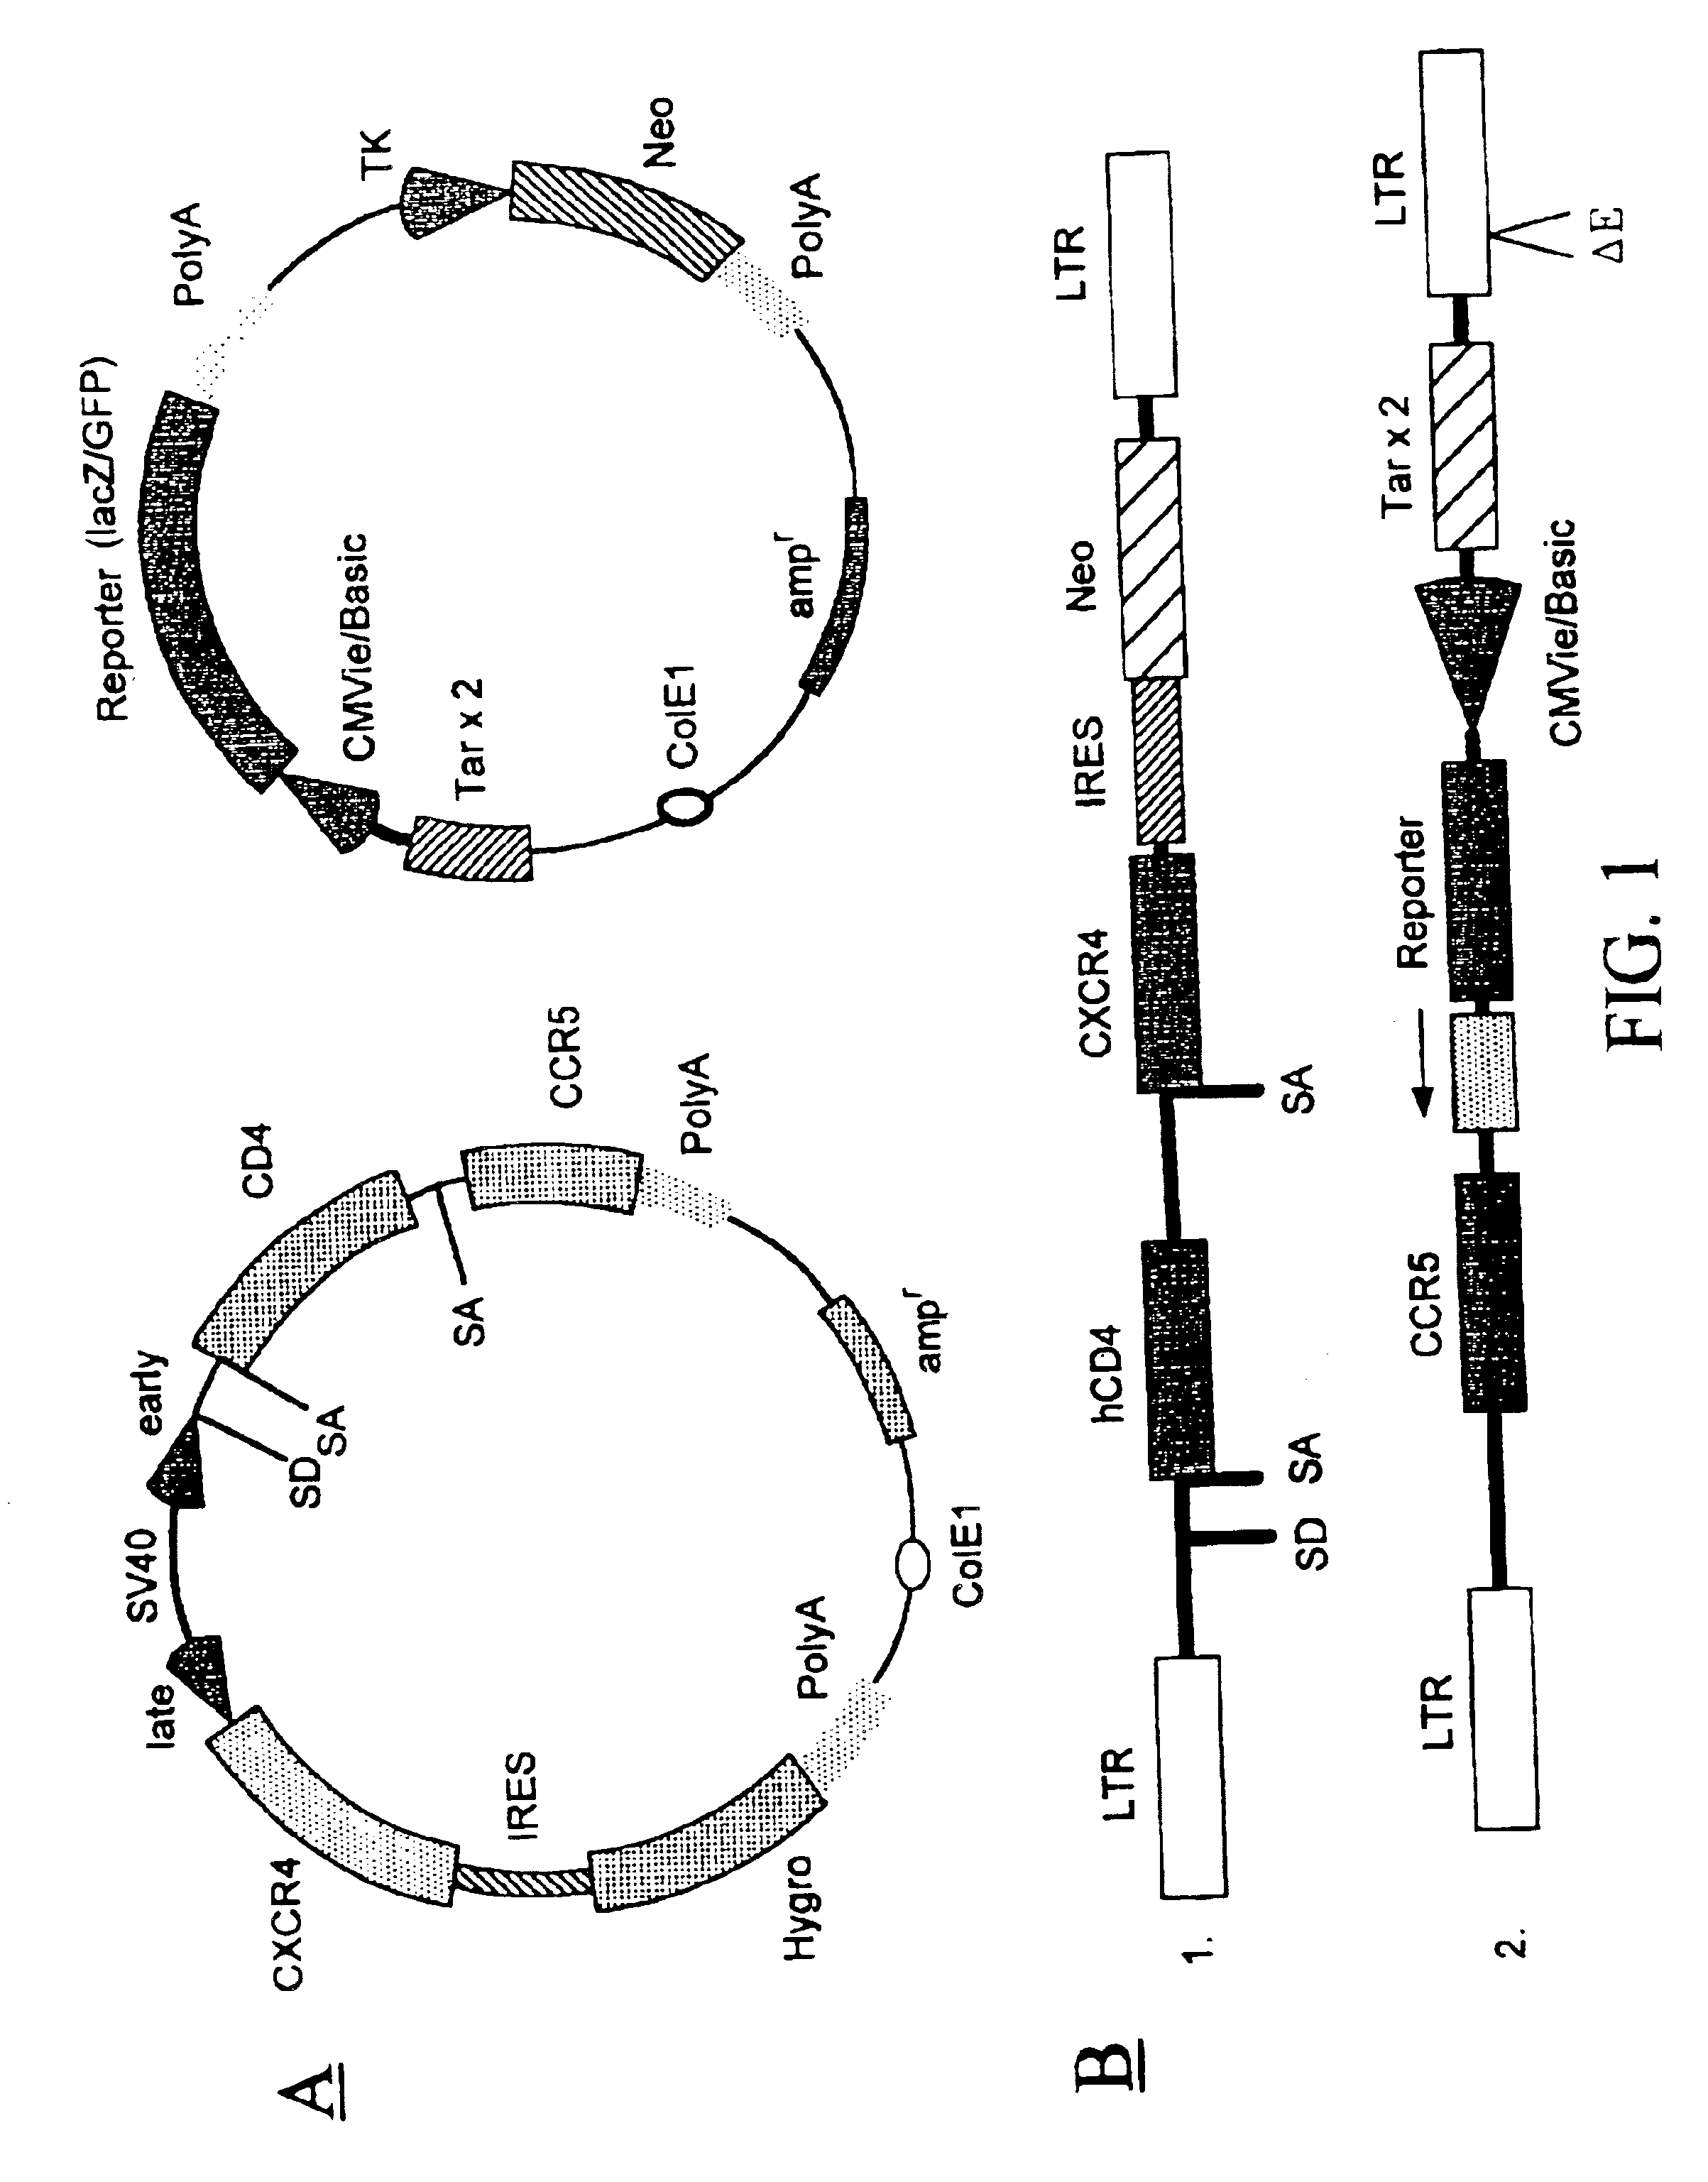 Method for producing recombinant cells for detecting HIV